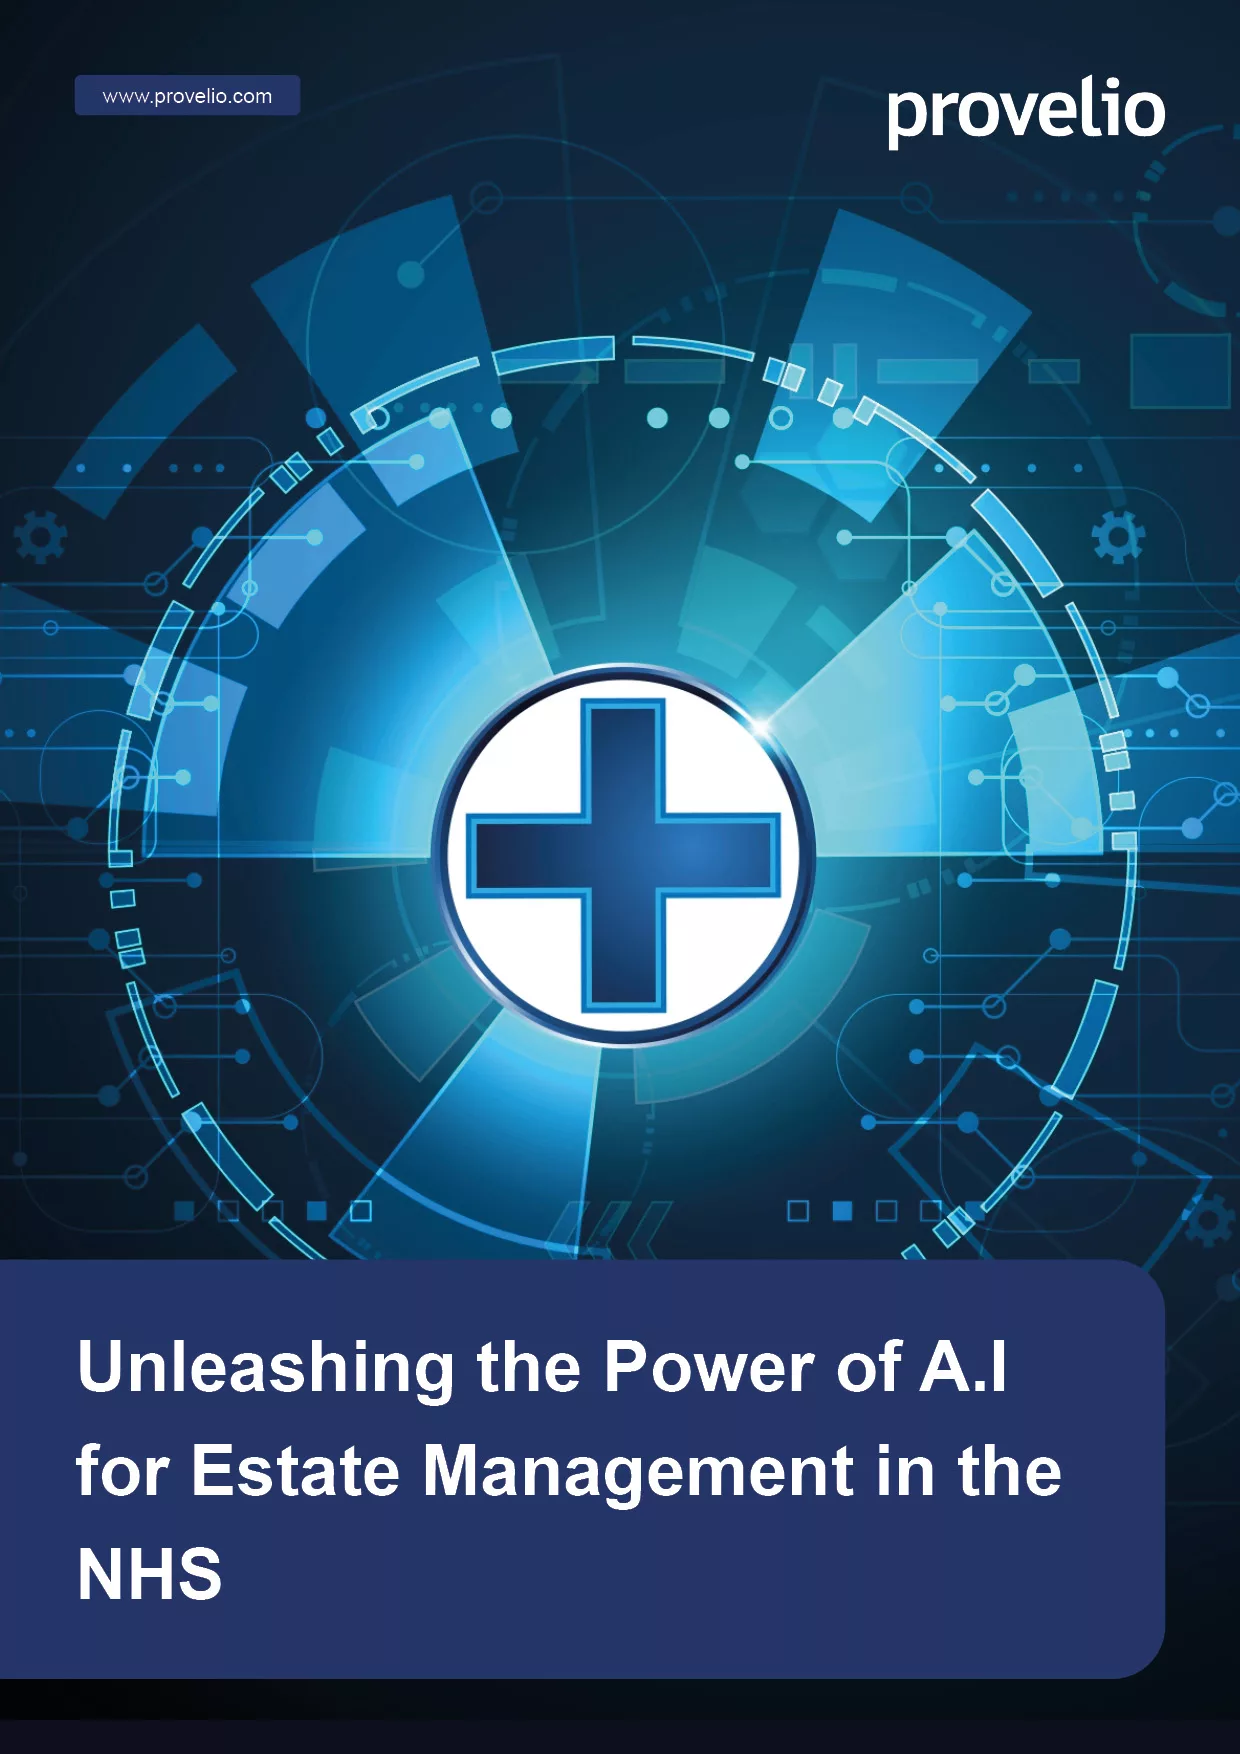 Cover Image of the guide Unleashing the Power of AI for Estate Management in the NHS.